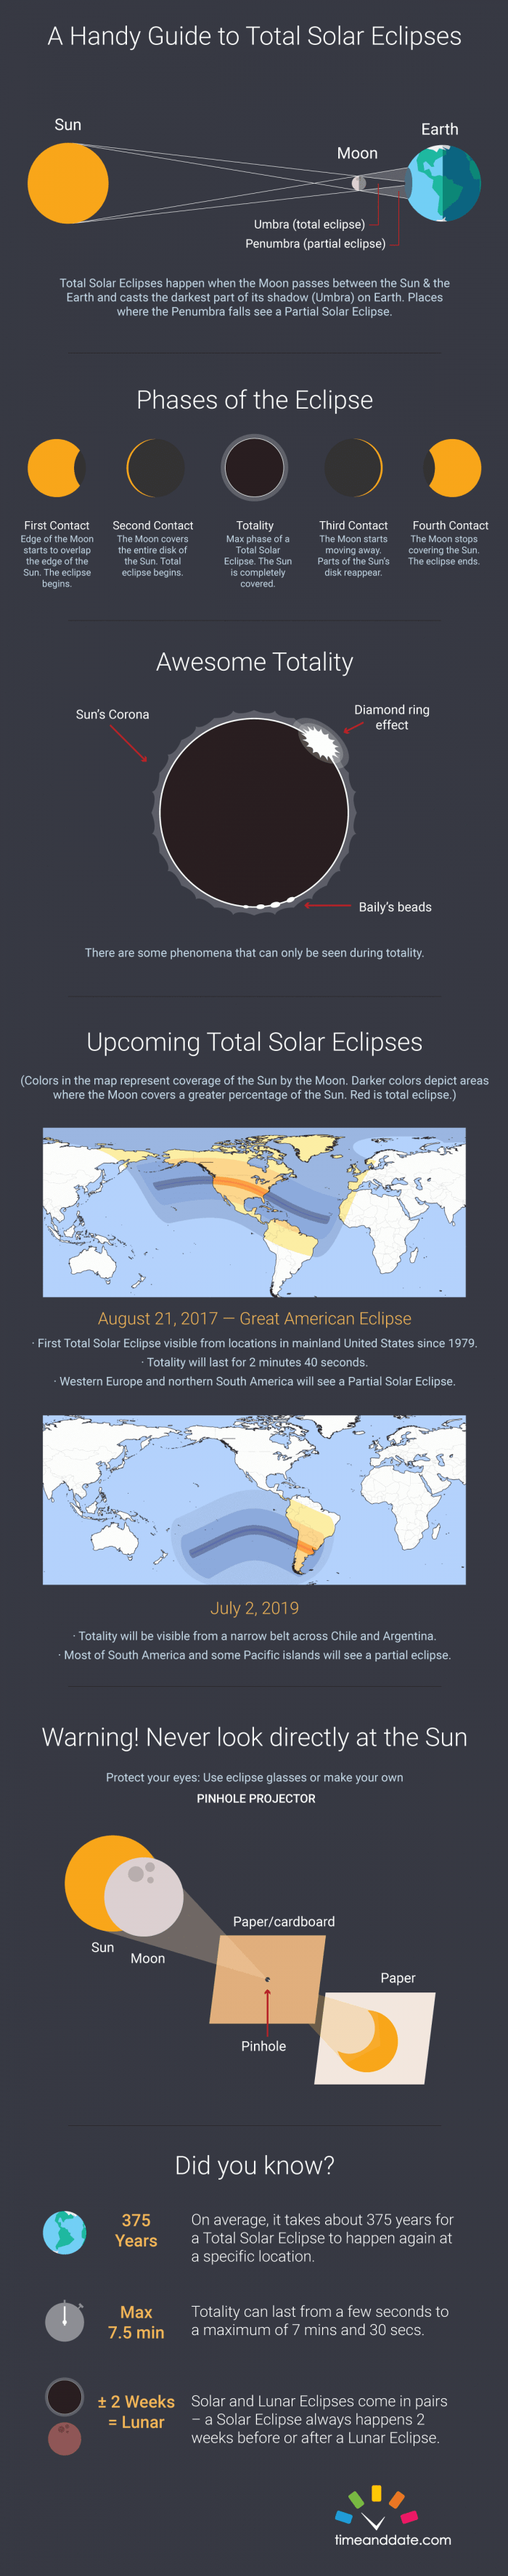 facts about total solar eclipse ahead of Aug 21 2017 eclipse